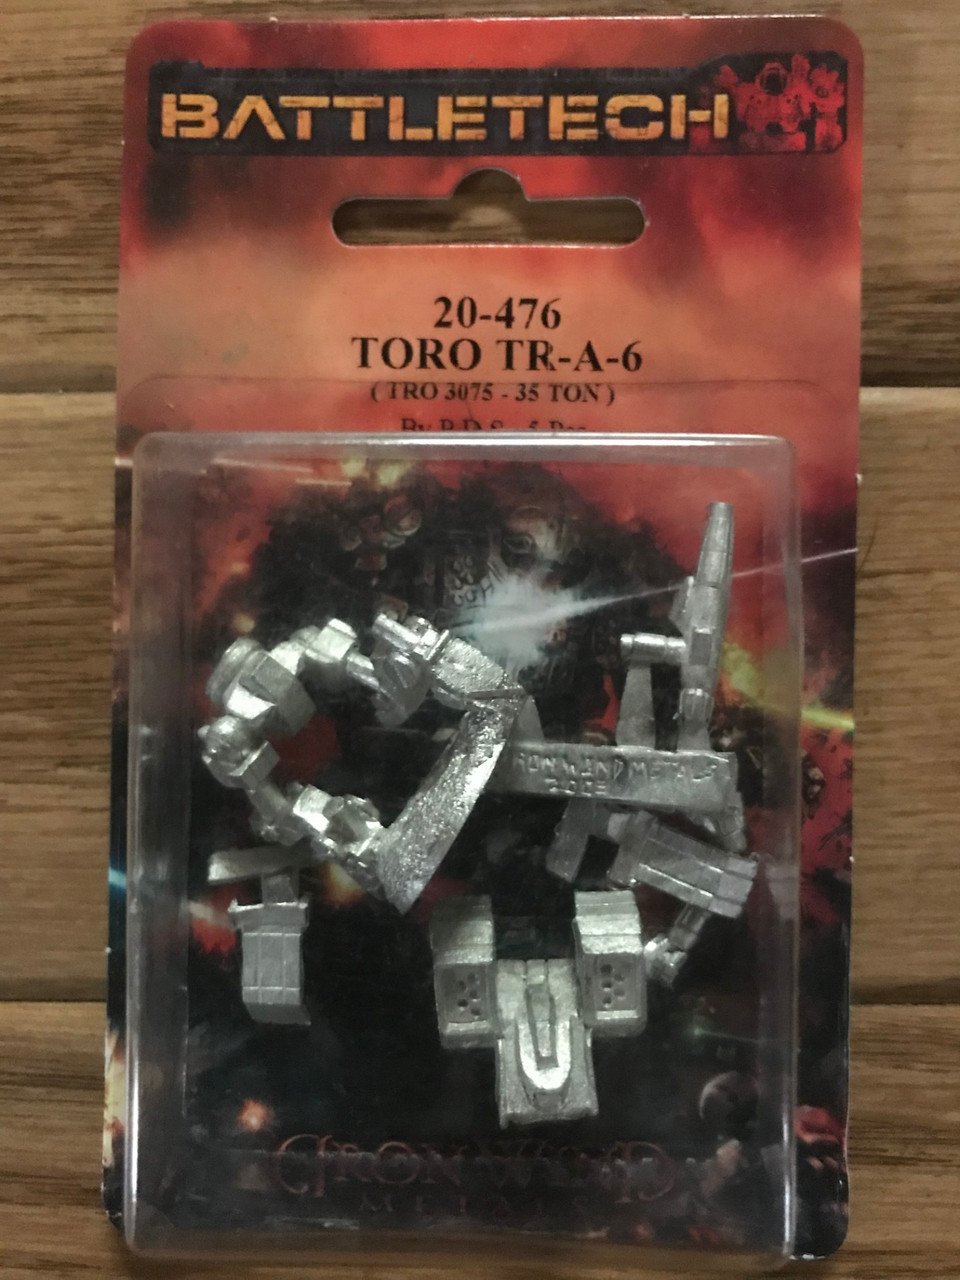 Battletech 20-476 Toro TR-A-6 (*See Per Order Flat Rate Shipping)